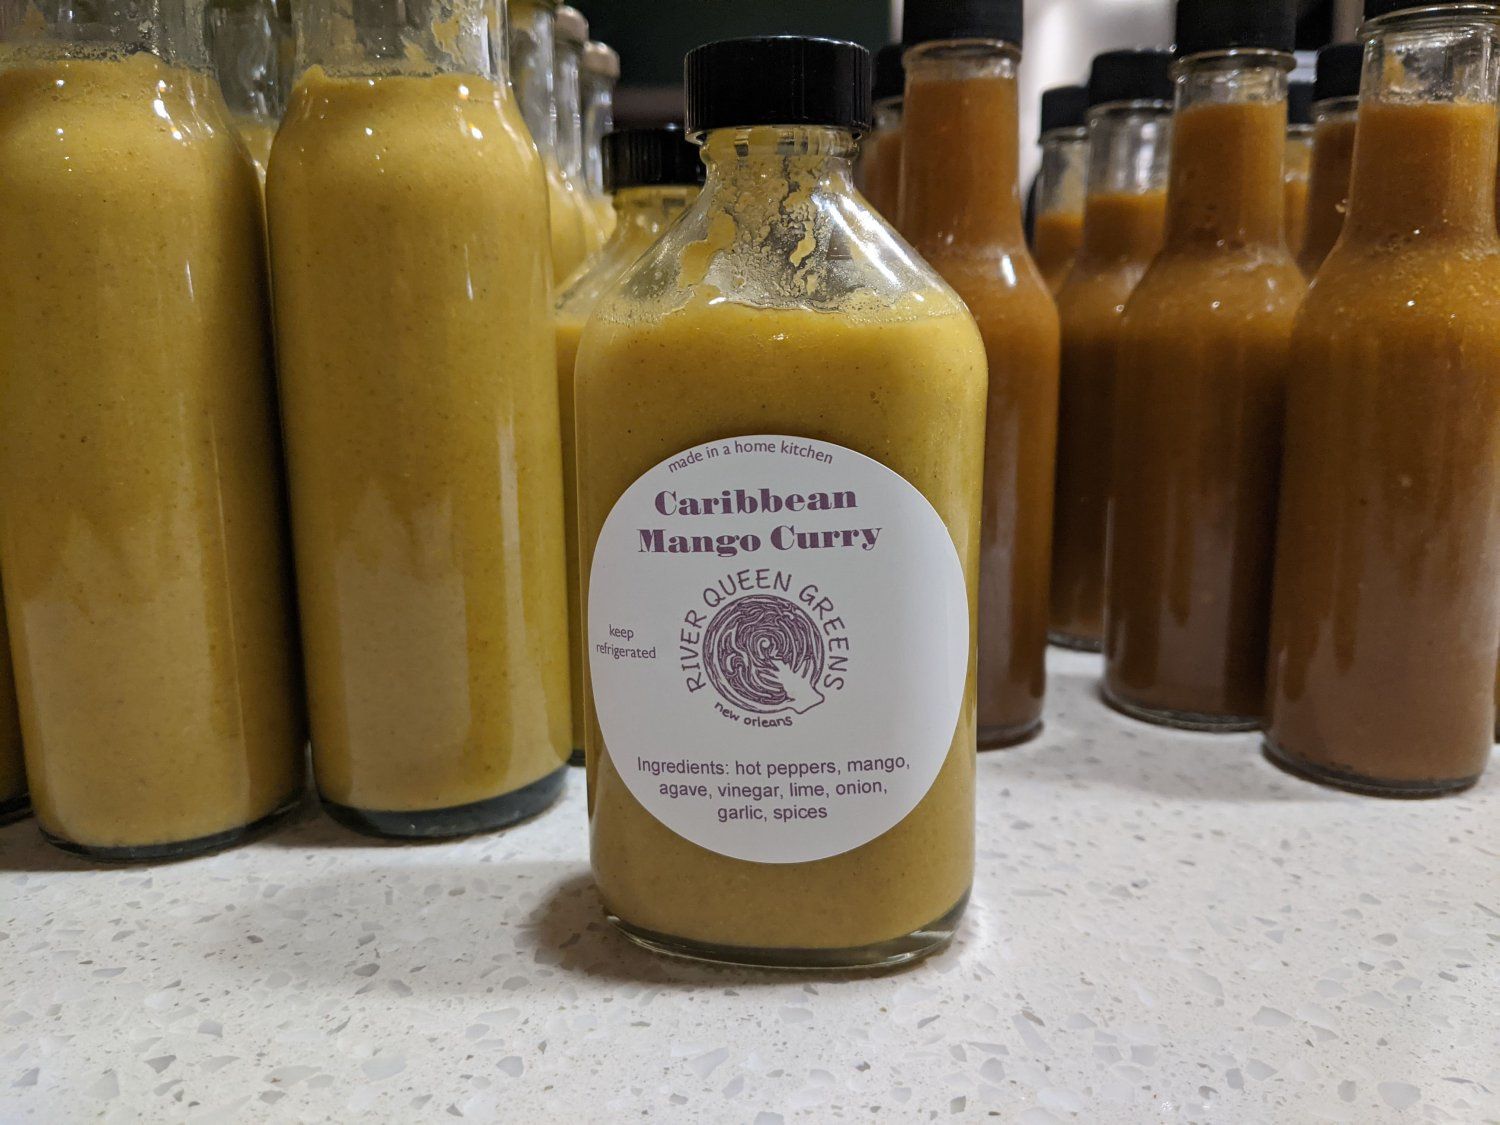 Previous Happening: Hot Sauce is Back!